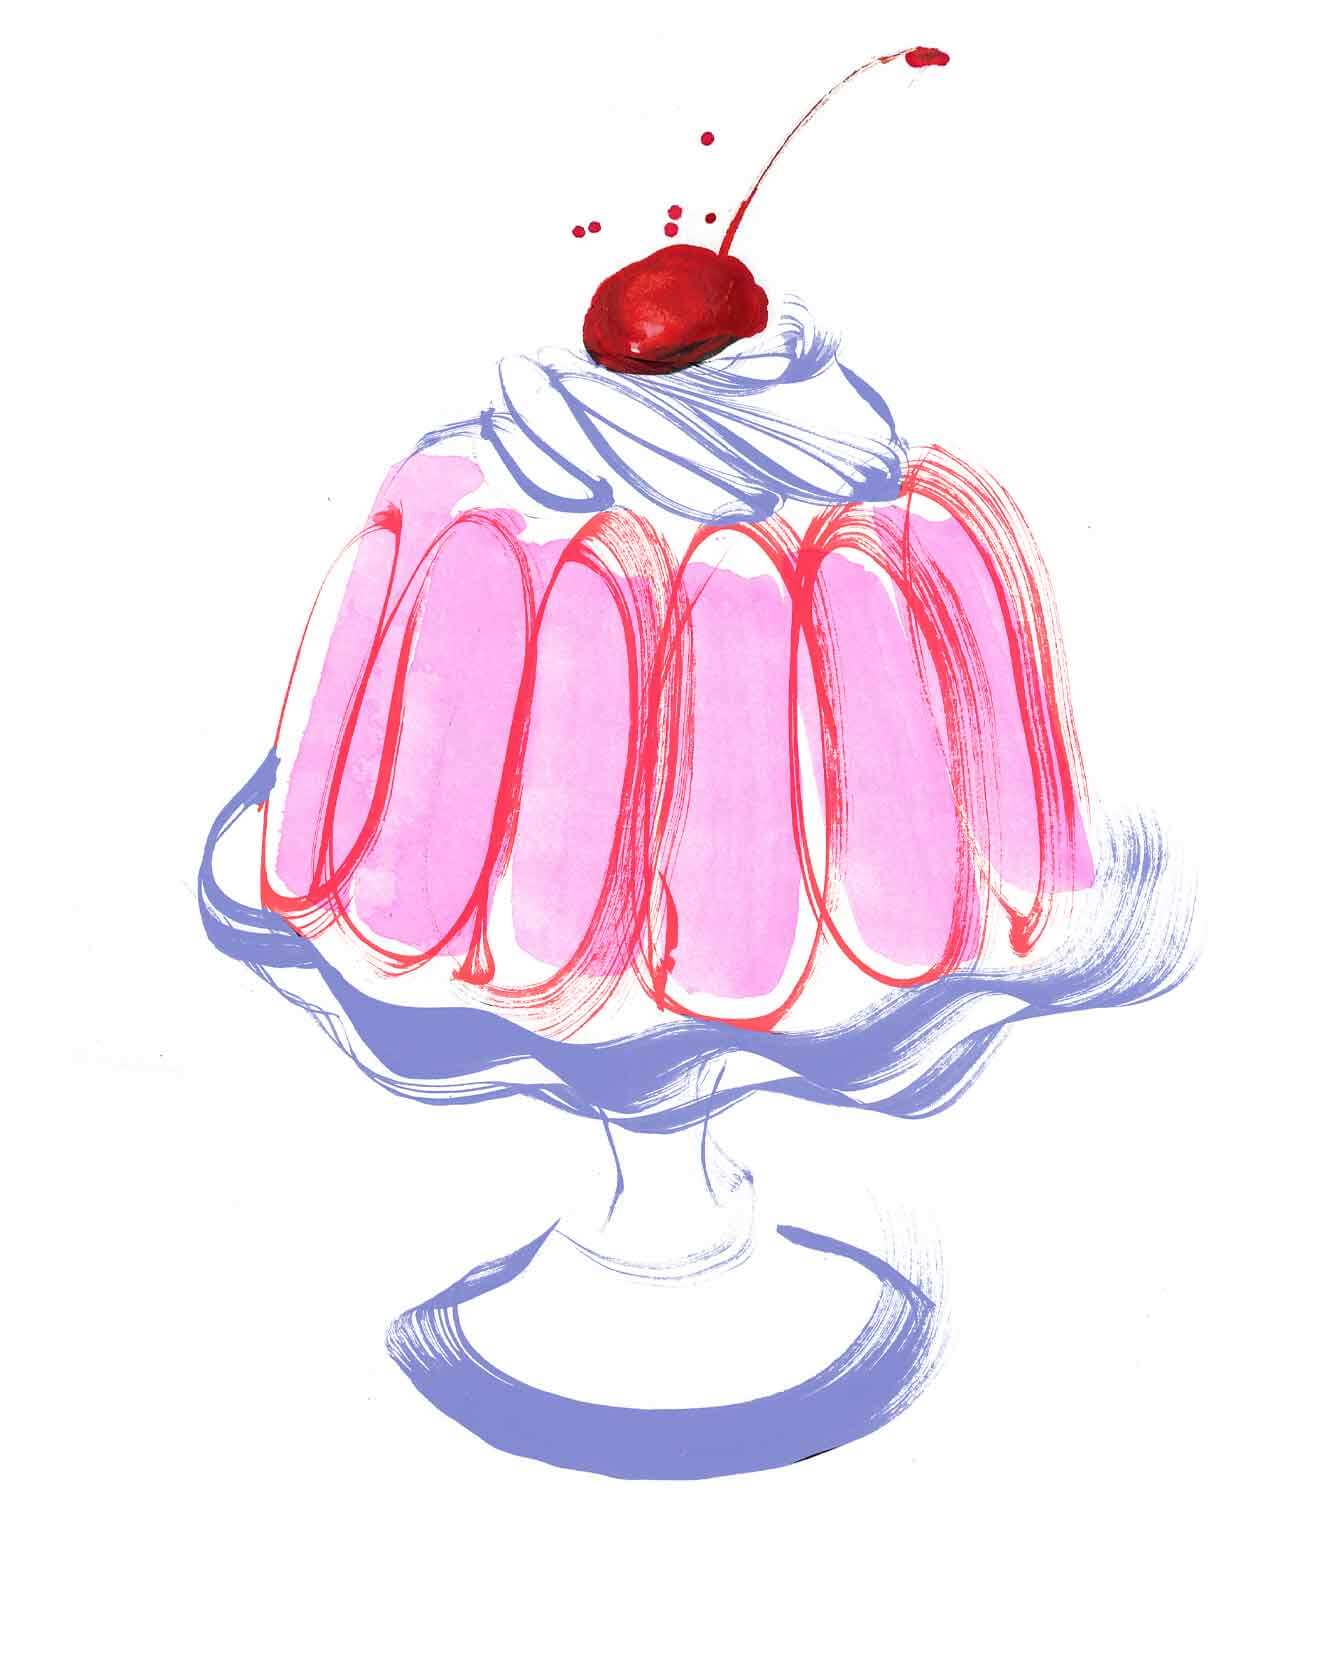 Pink jelly dessert illustrated with a cherry on top. Ink and brushstroke inspired. Food illustration.